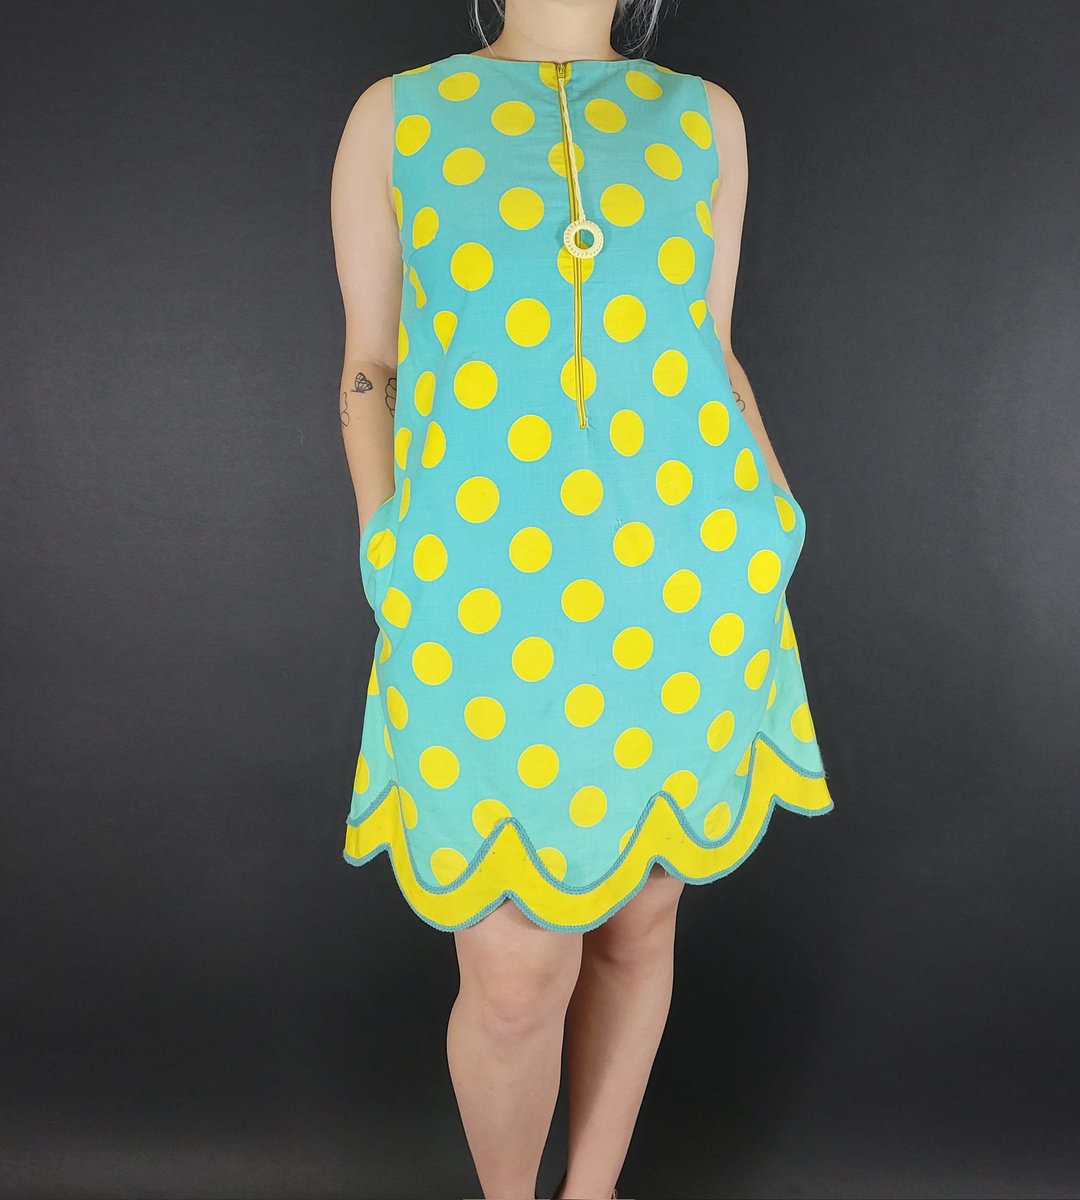 60s Campus Casuals Polka Dot Dress
🌼wildfirevintageco.com🌼
#campuscasuals #vintagedress #polkadotdress #sixtiesvintage #clothingshop #wildfirevintage